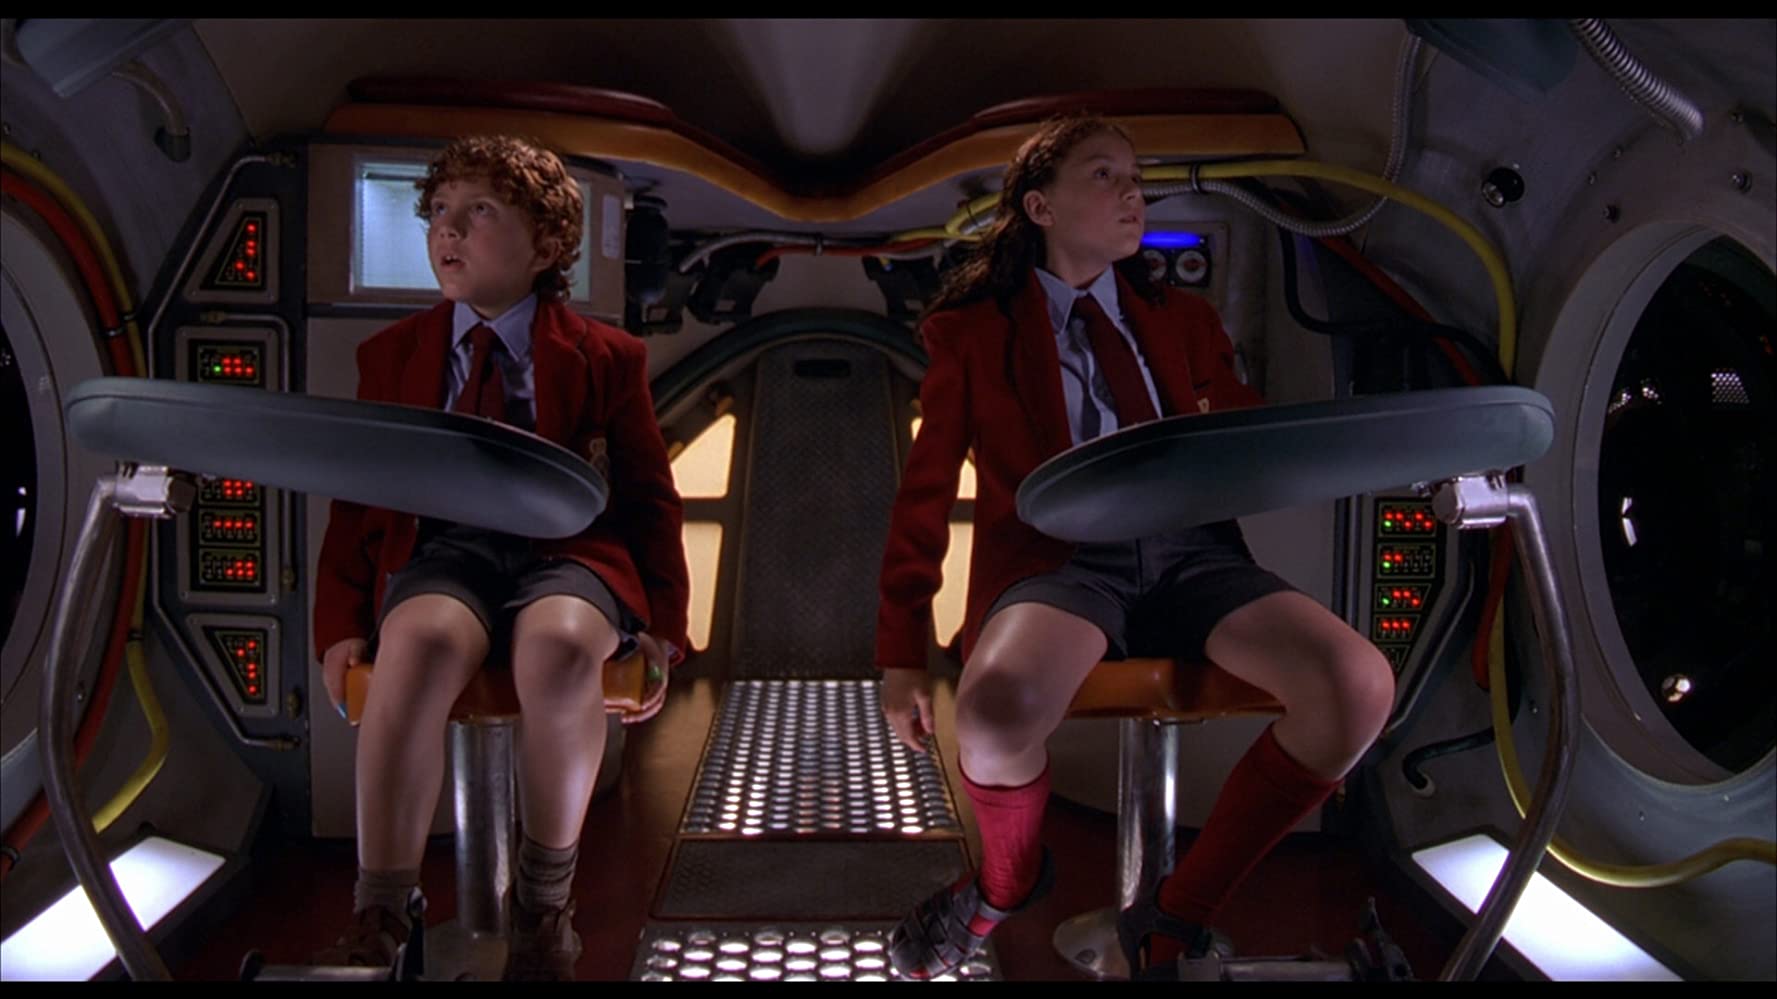 The brother and sister from Spy Kids, Carmen and Juni, sit inside a very weird vehicle, staring in amazement at the controls around them.